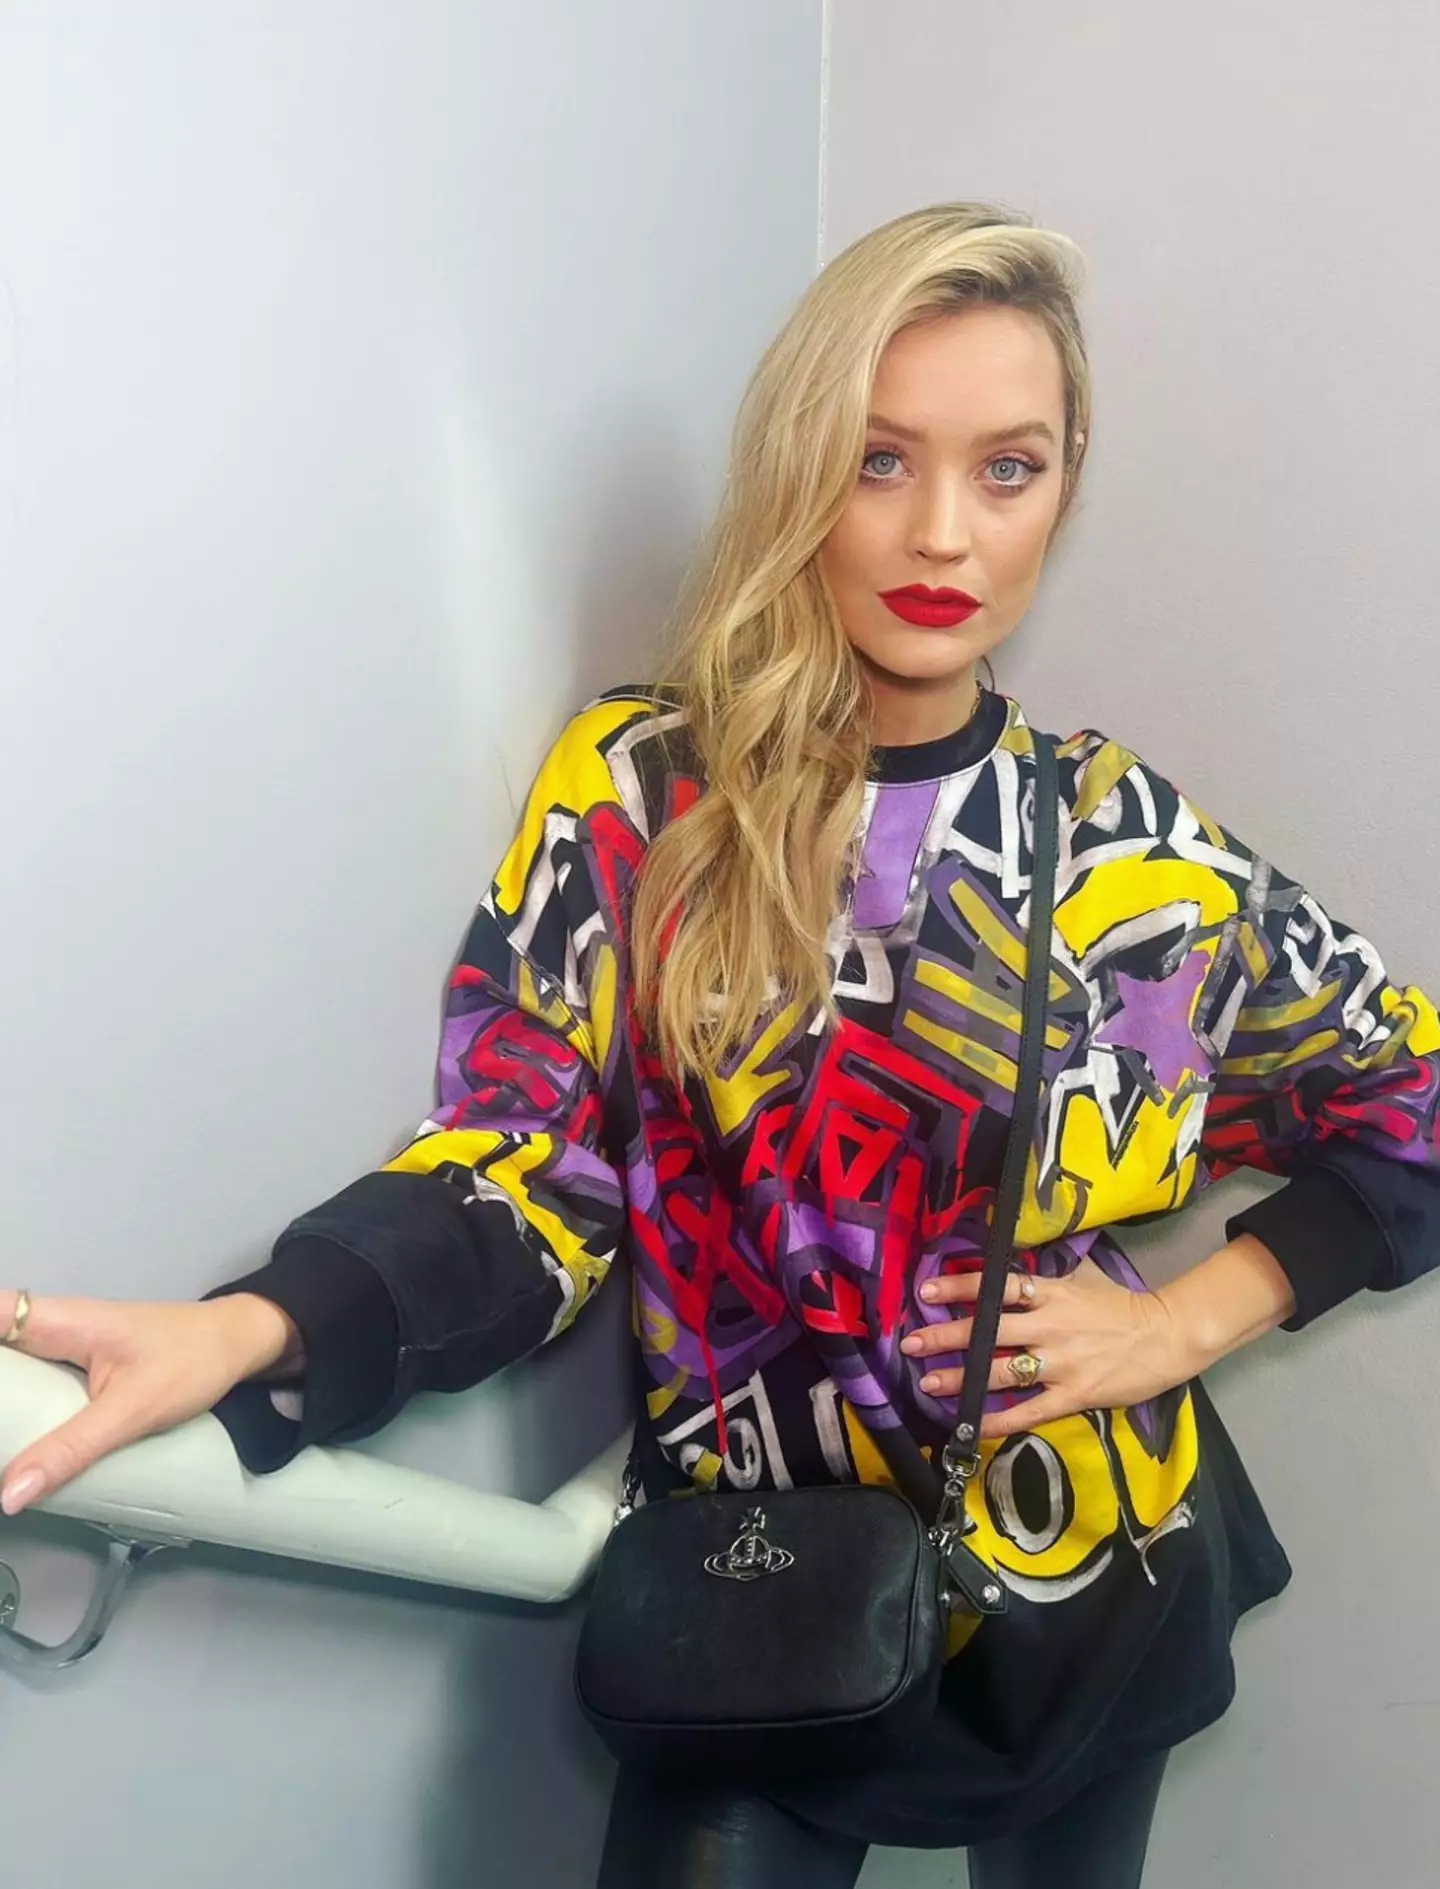 Laura Whitmore said she has been 'scrutinised' a lot in her job.